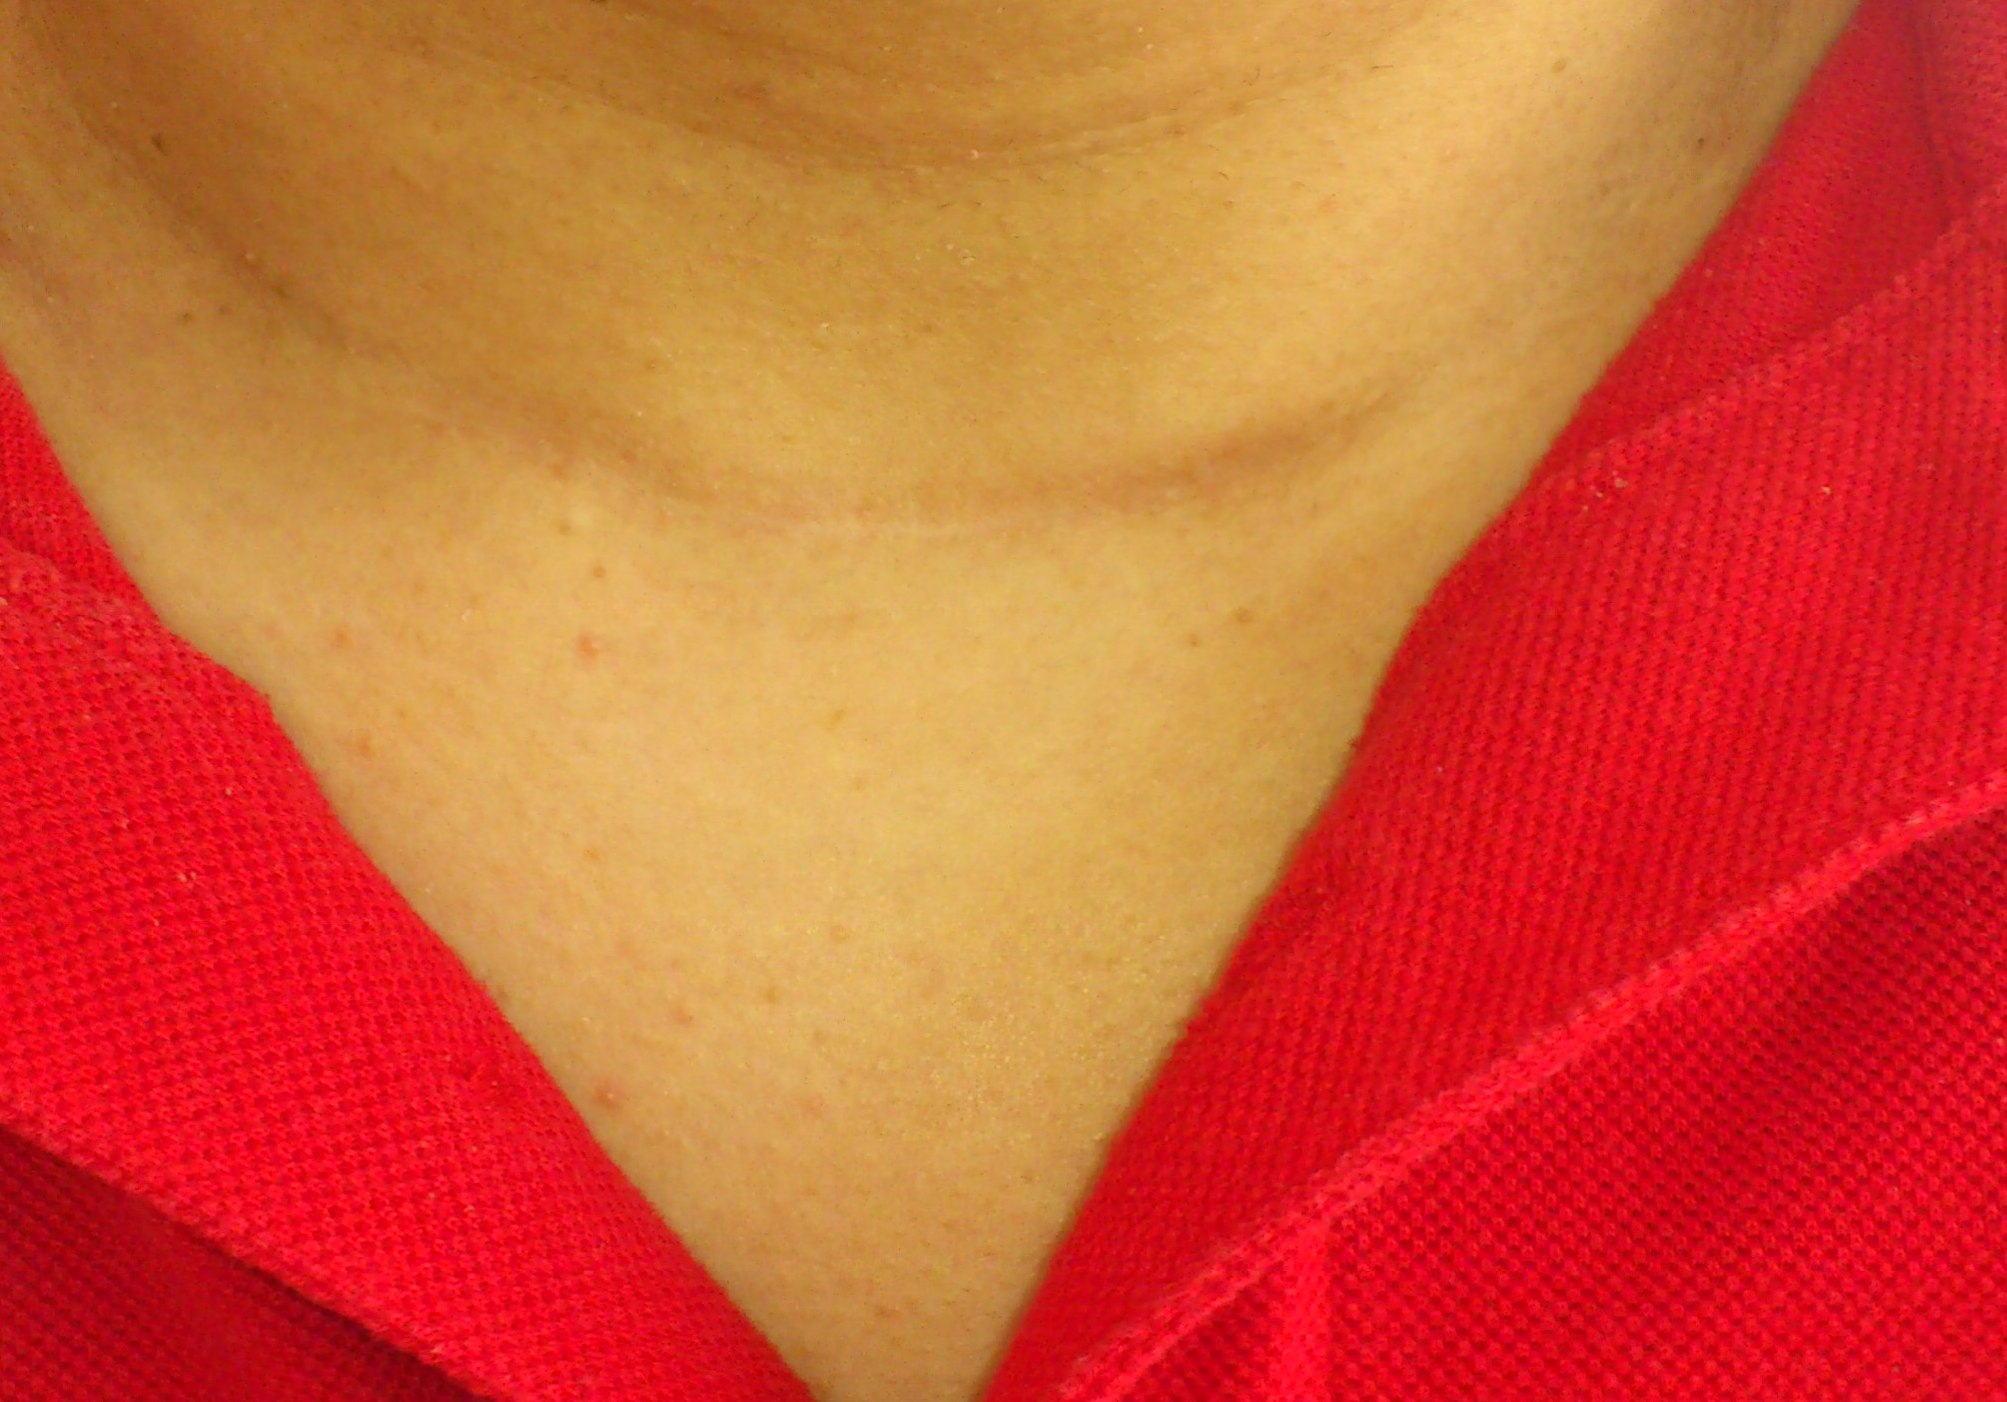 Thyroidectomy scar - one year later